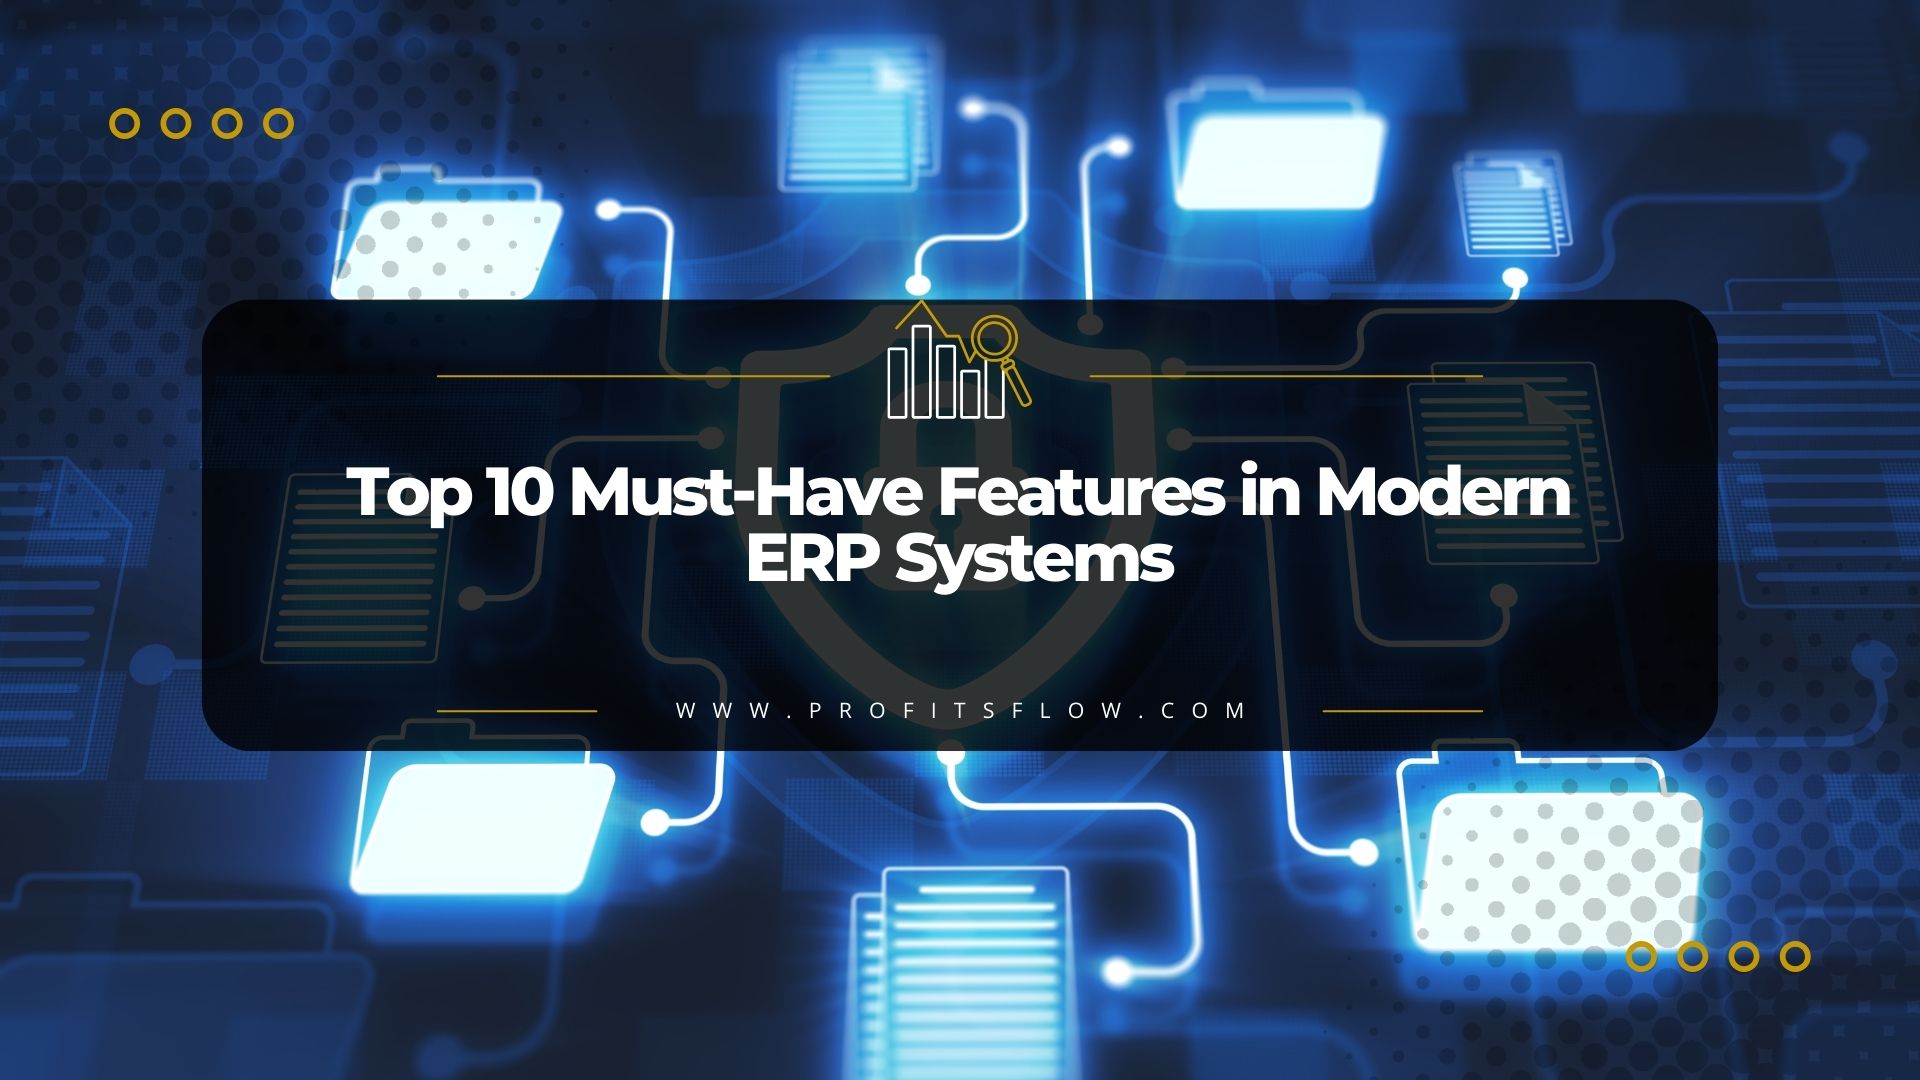 Top 10 Must-Have Features in Modern ERP Systems